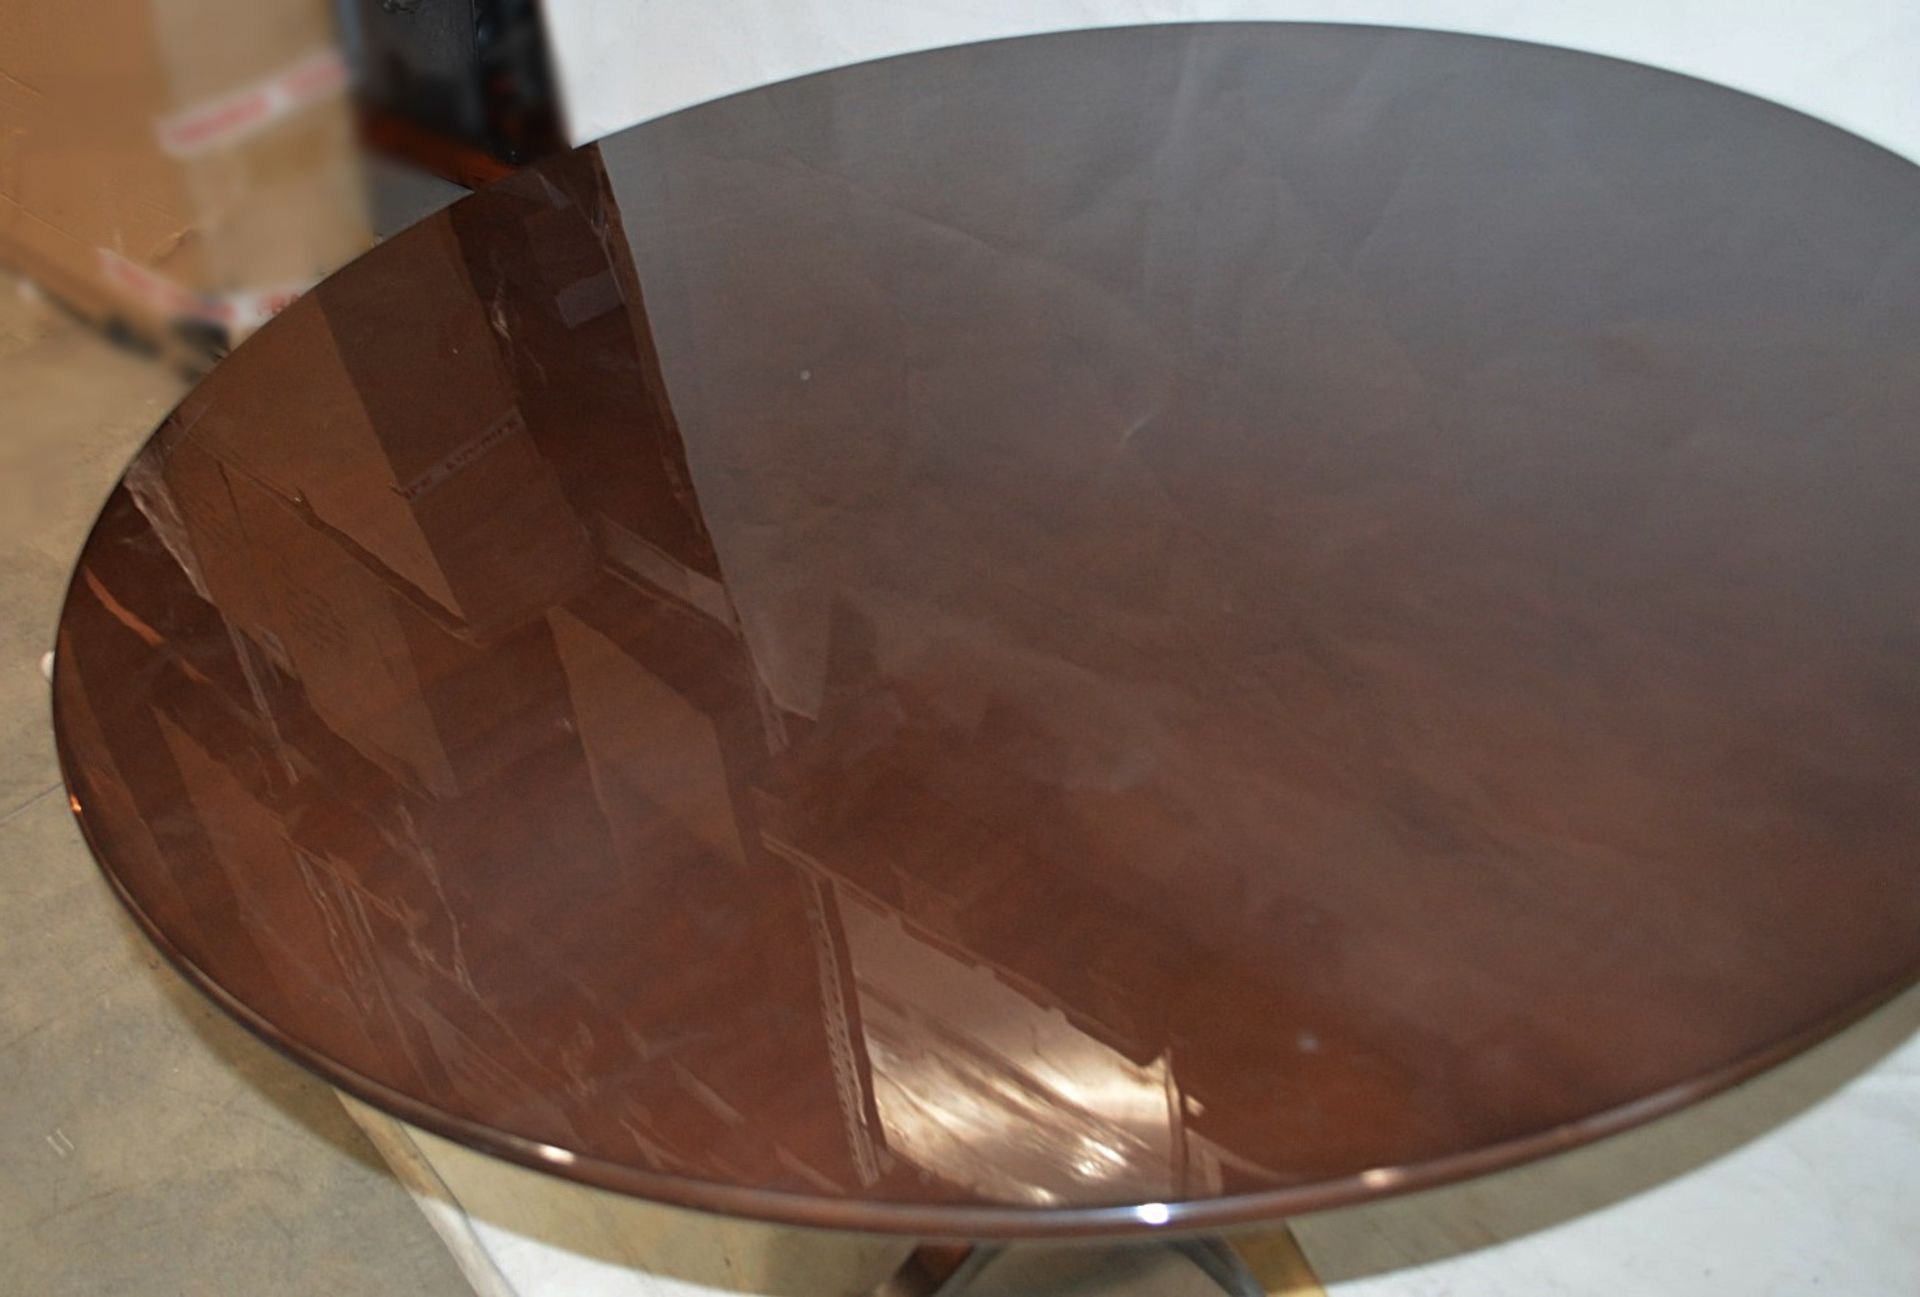 1 x Christopher Guy 'Toulouse' Round Georgian-Style Restaurant Dining Table - Original RRP £4,600.00 - Image 5 of 9